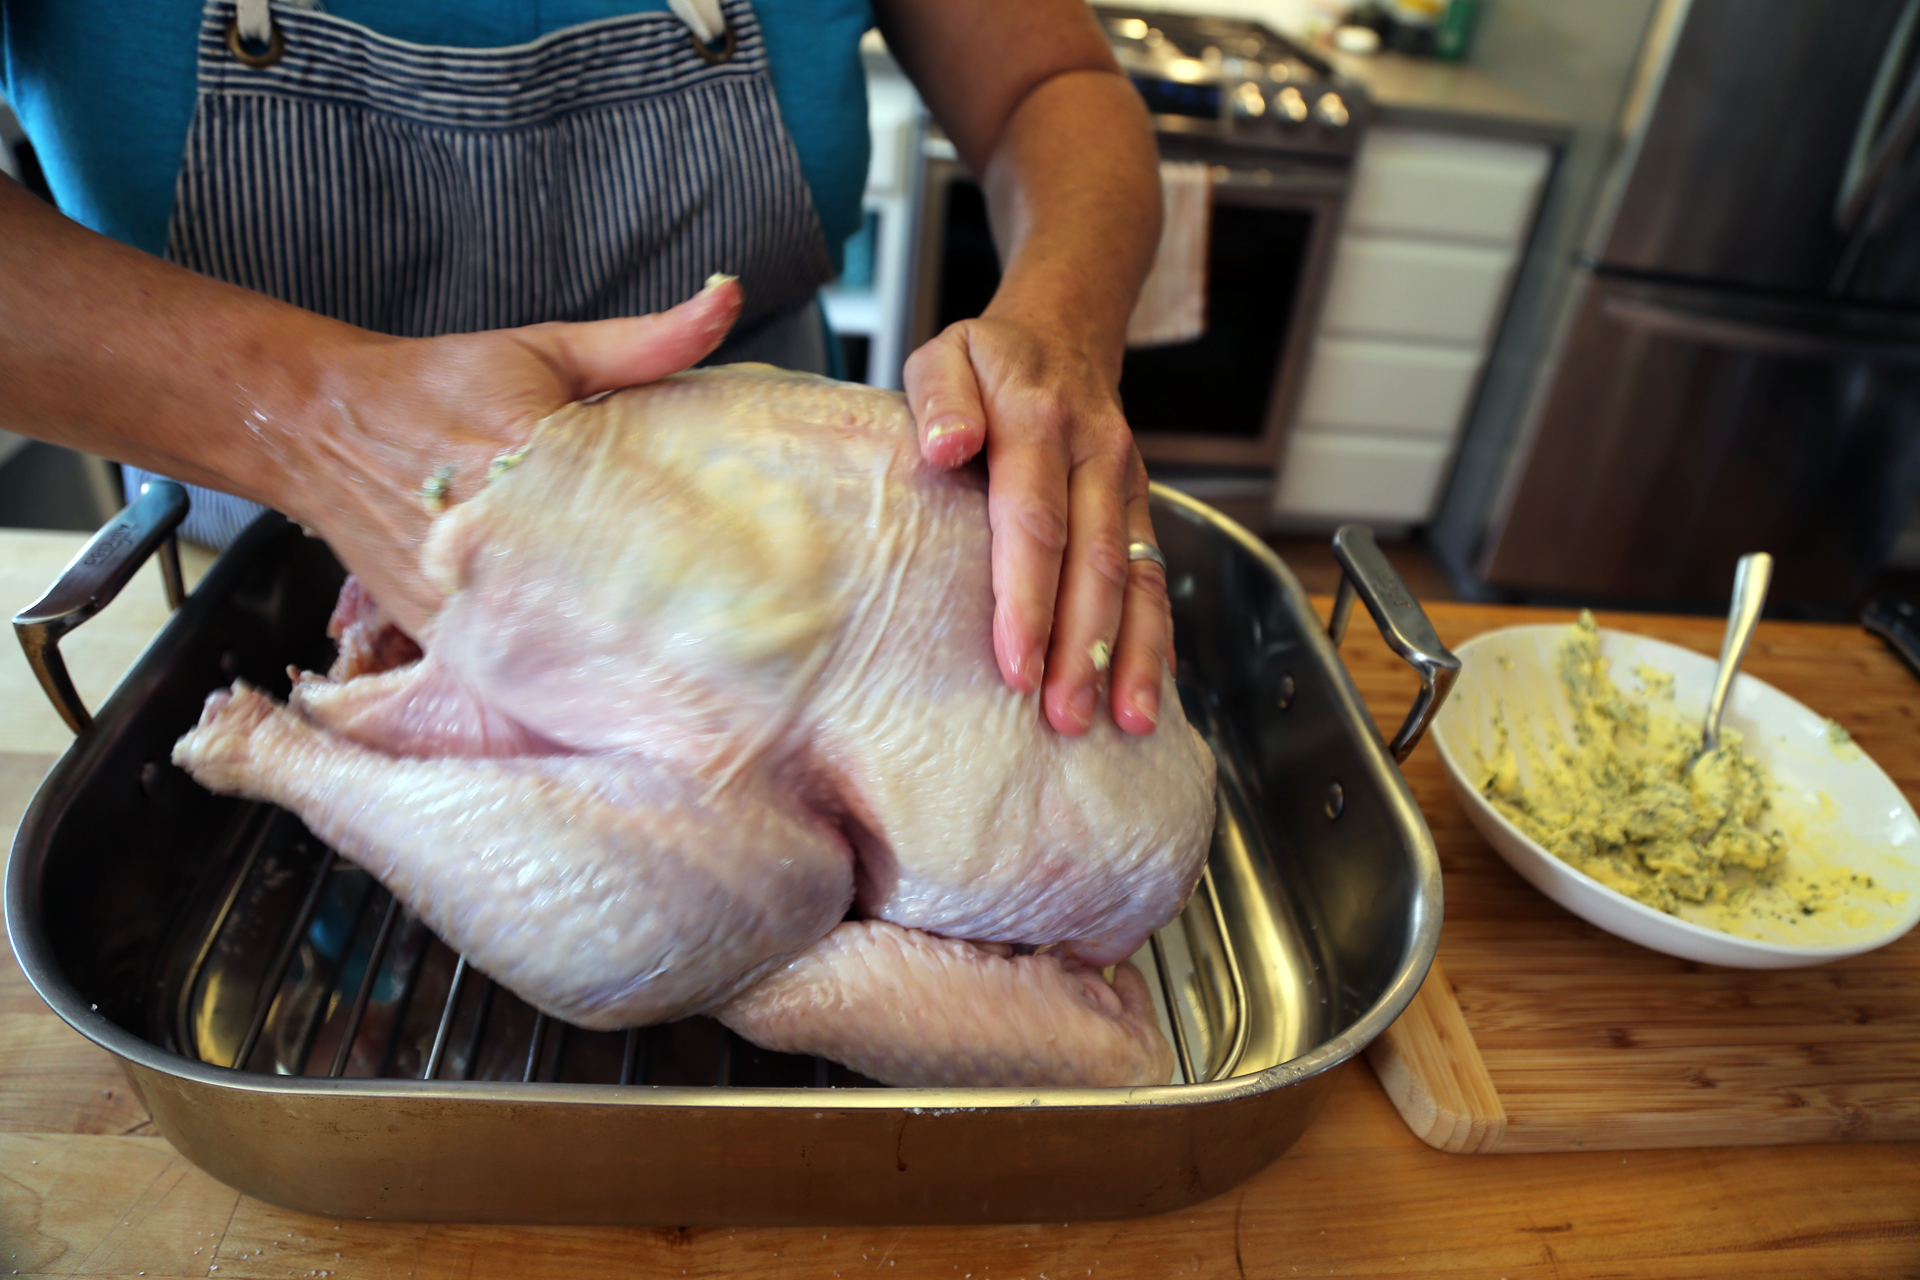 Rub the butter mixture under the skin and over the top of the skin.